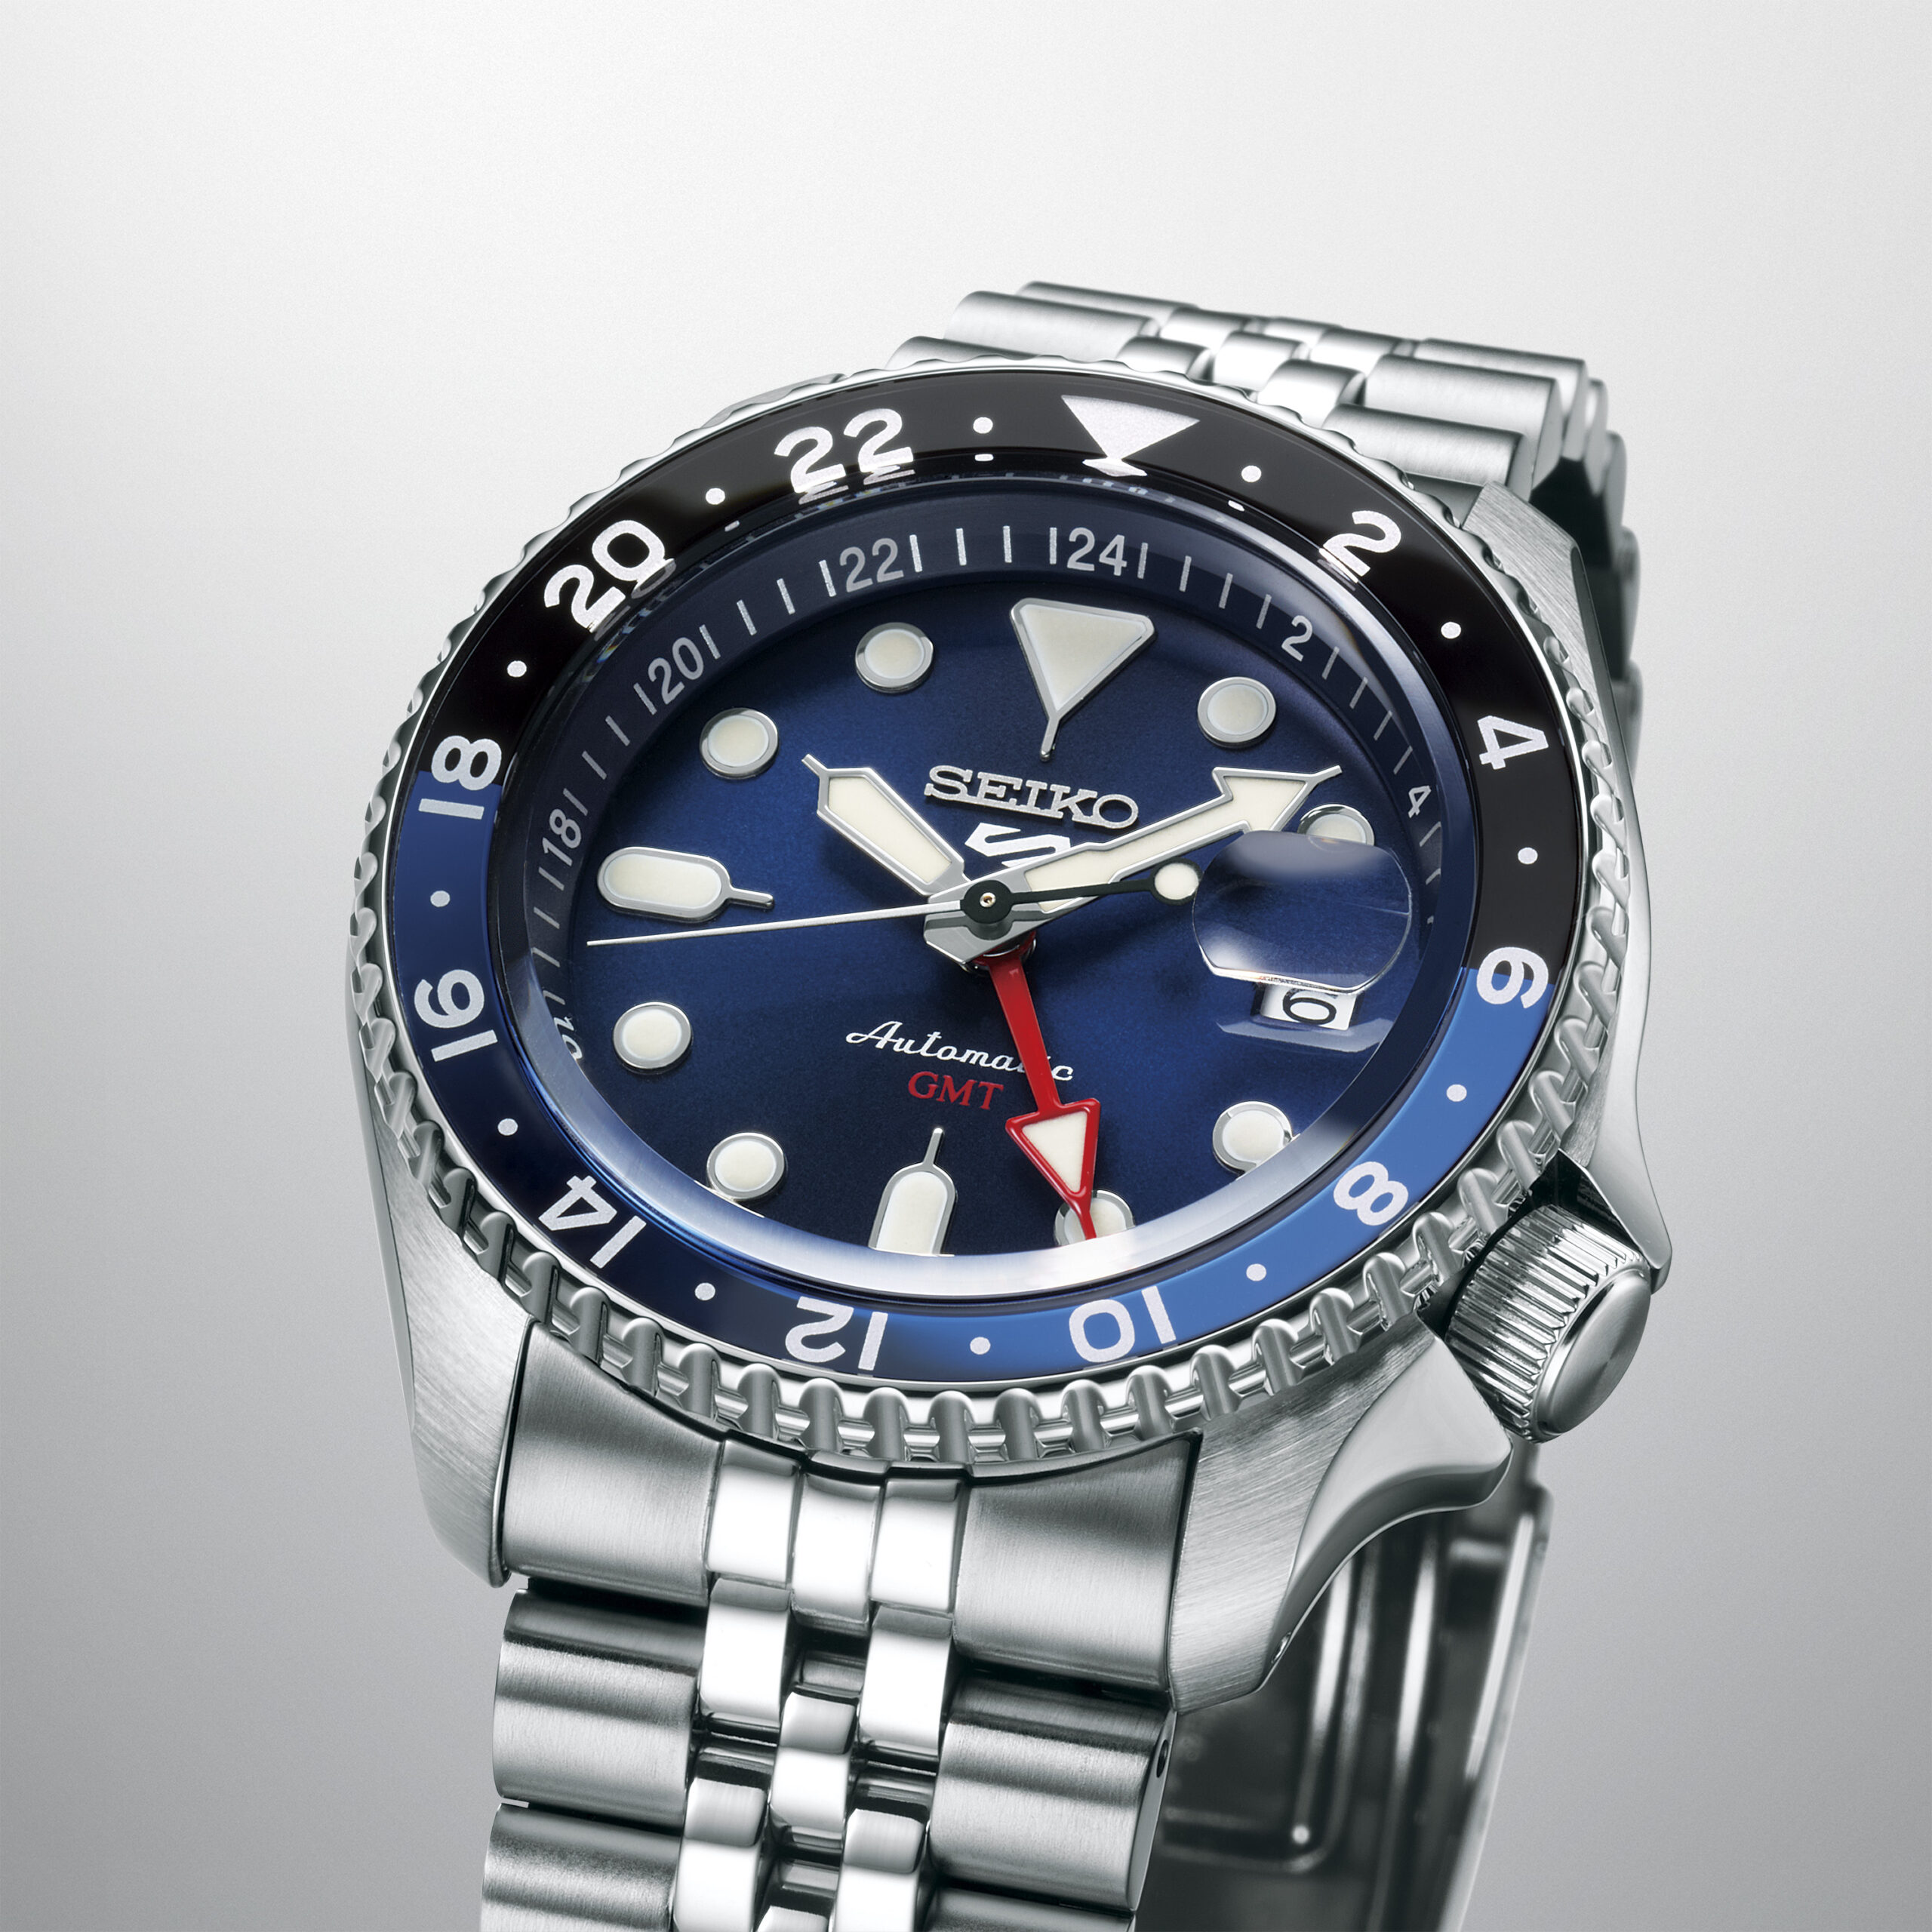 First Look: The Seiko Sports Is Sub-$500 Travel Watch We Can't Wait To See | aBlogtoWatch